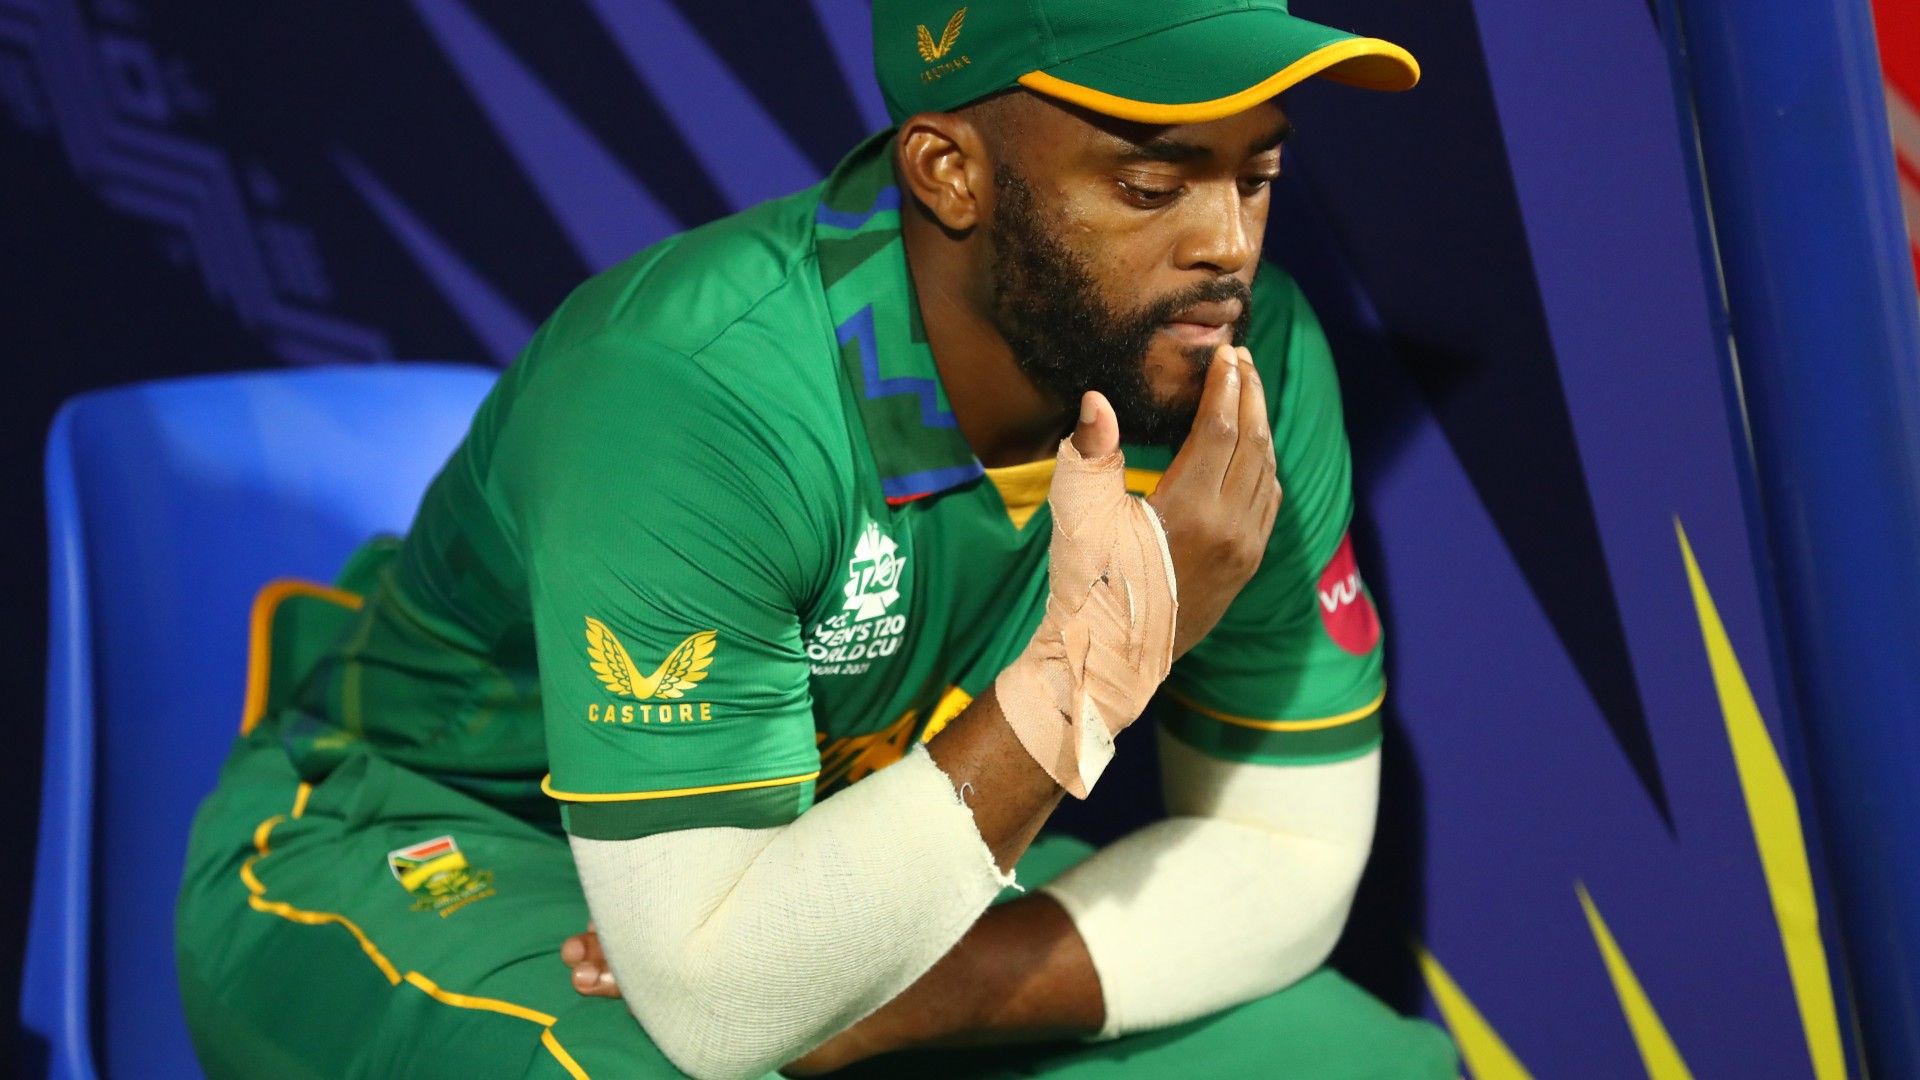 South Africa's 10-run win over England not enough to avoid World Cup exit